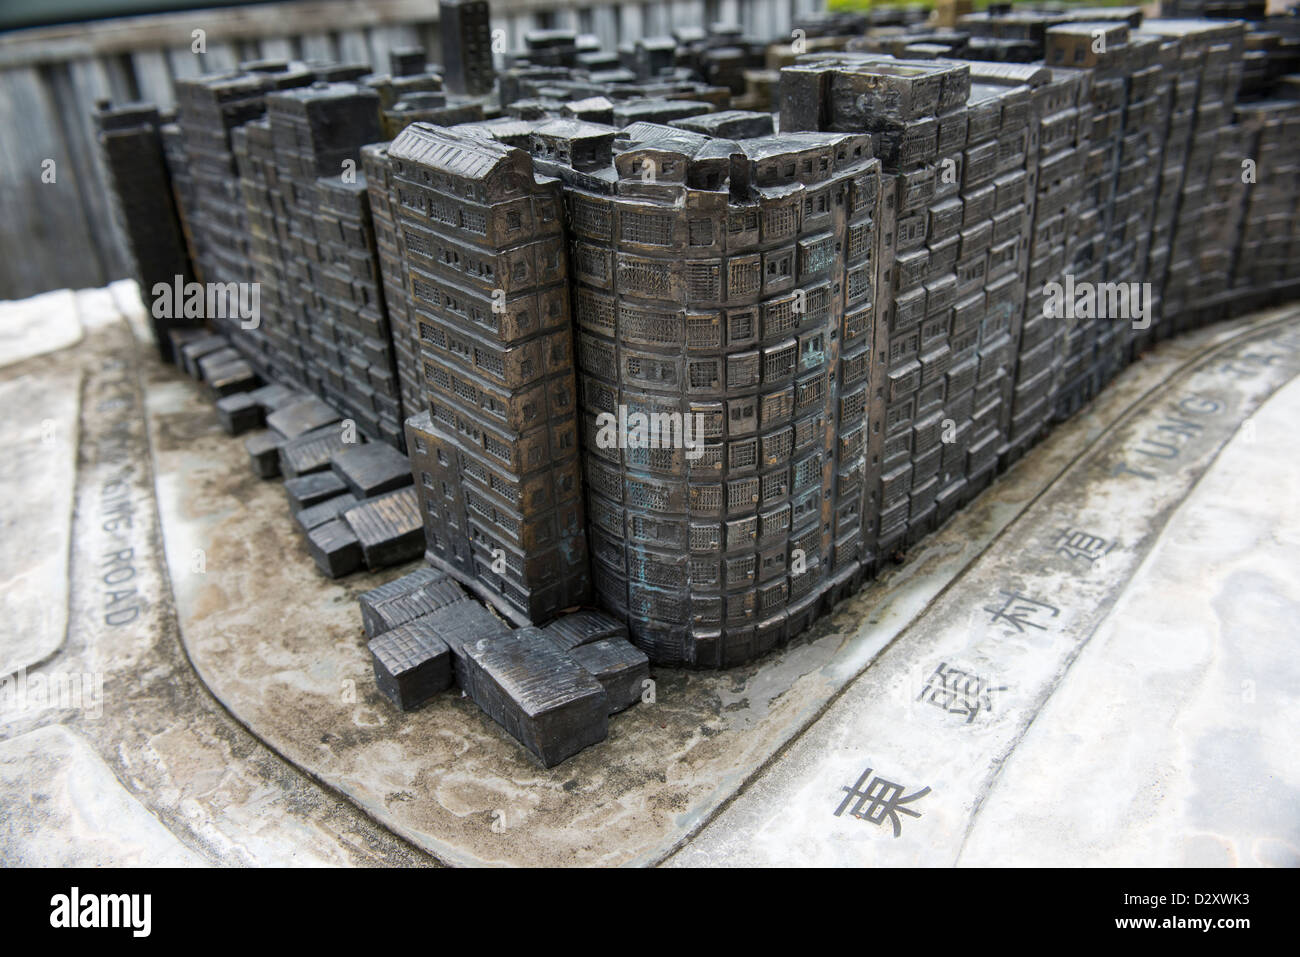 A scale model of the old Kowloon Walled City before it was demolised in 1994, Hong Kong. Stock Photo